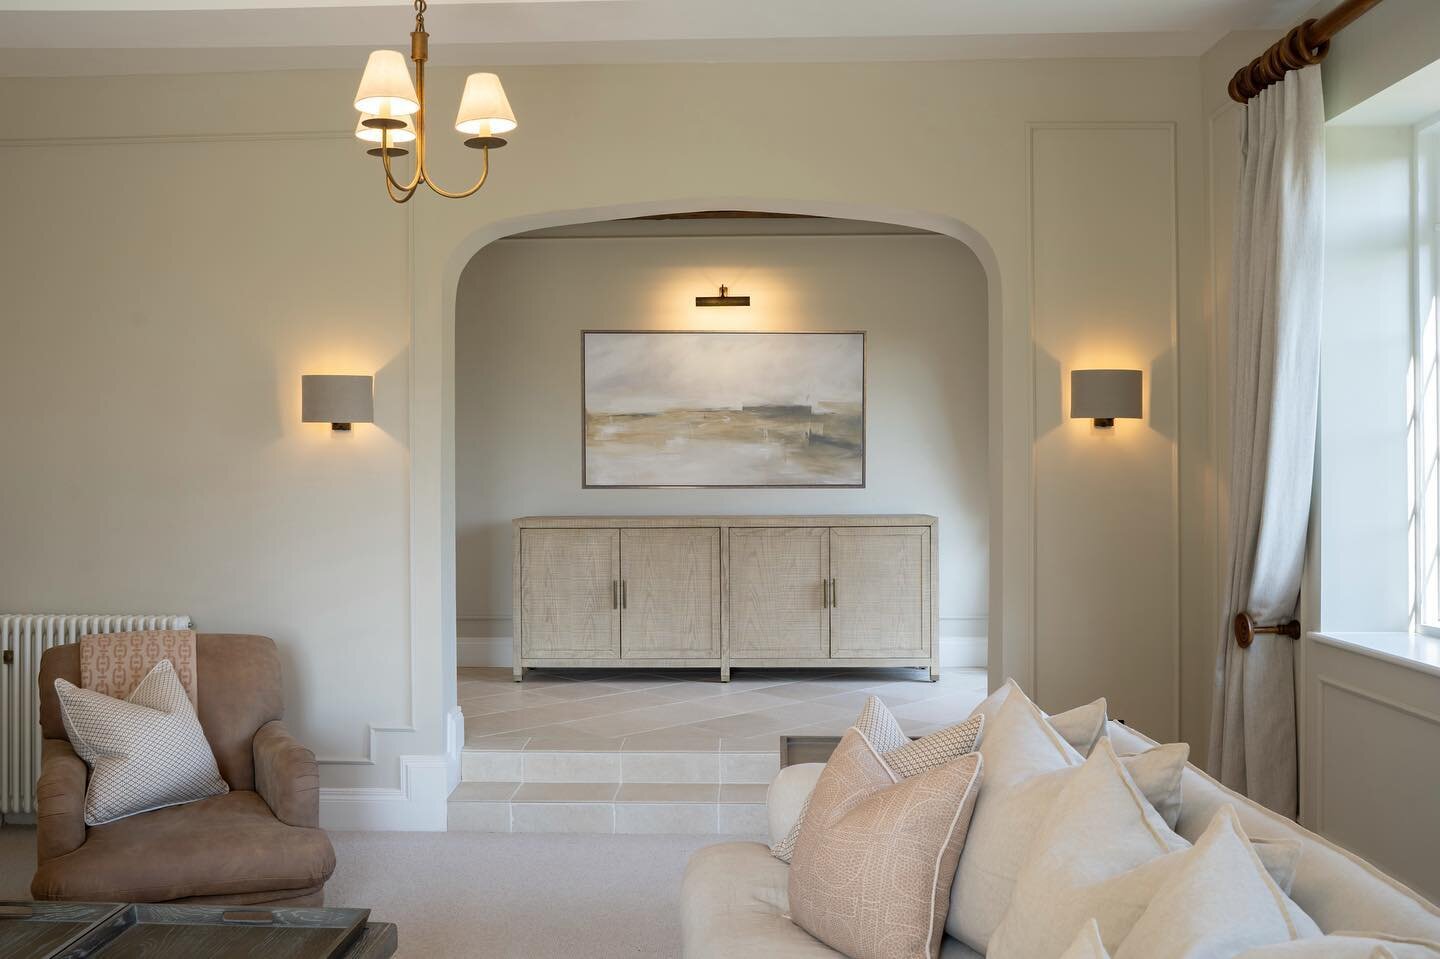 The main lounge from our latest Suffolk Property renovation. We restored and transformed this space into a warm and timeless lounge based around relaxed luxury. Swipe for some shots of the space as we started to strip it back. 
.
.
#maveninteriorstud